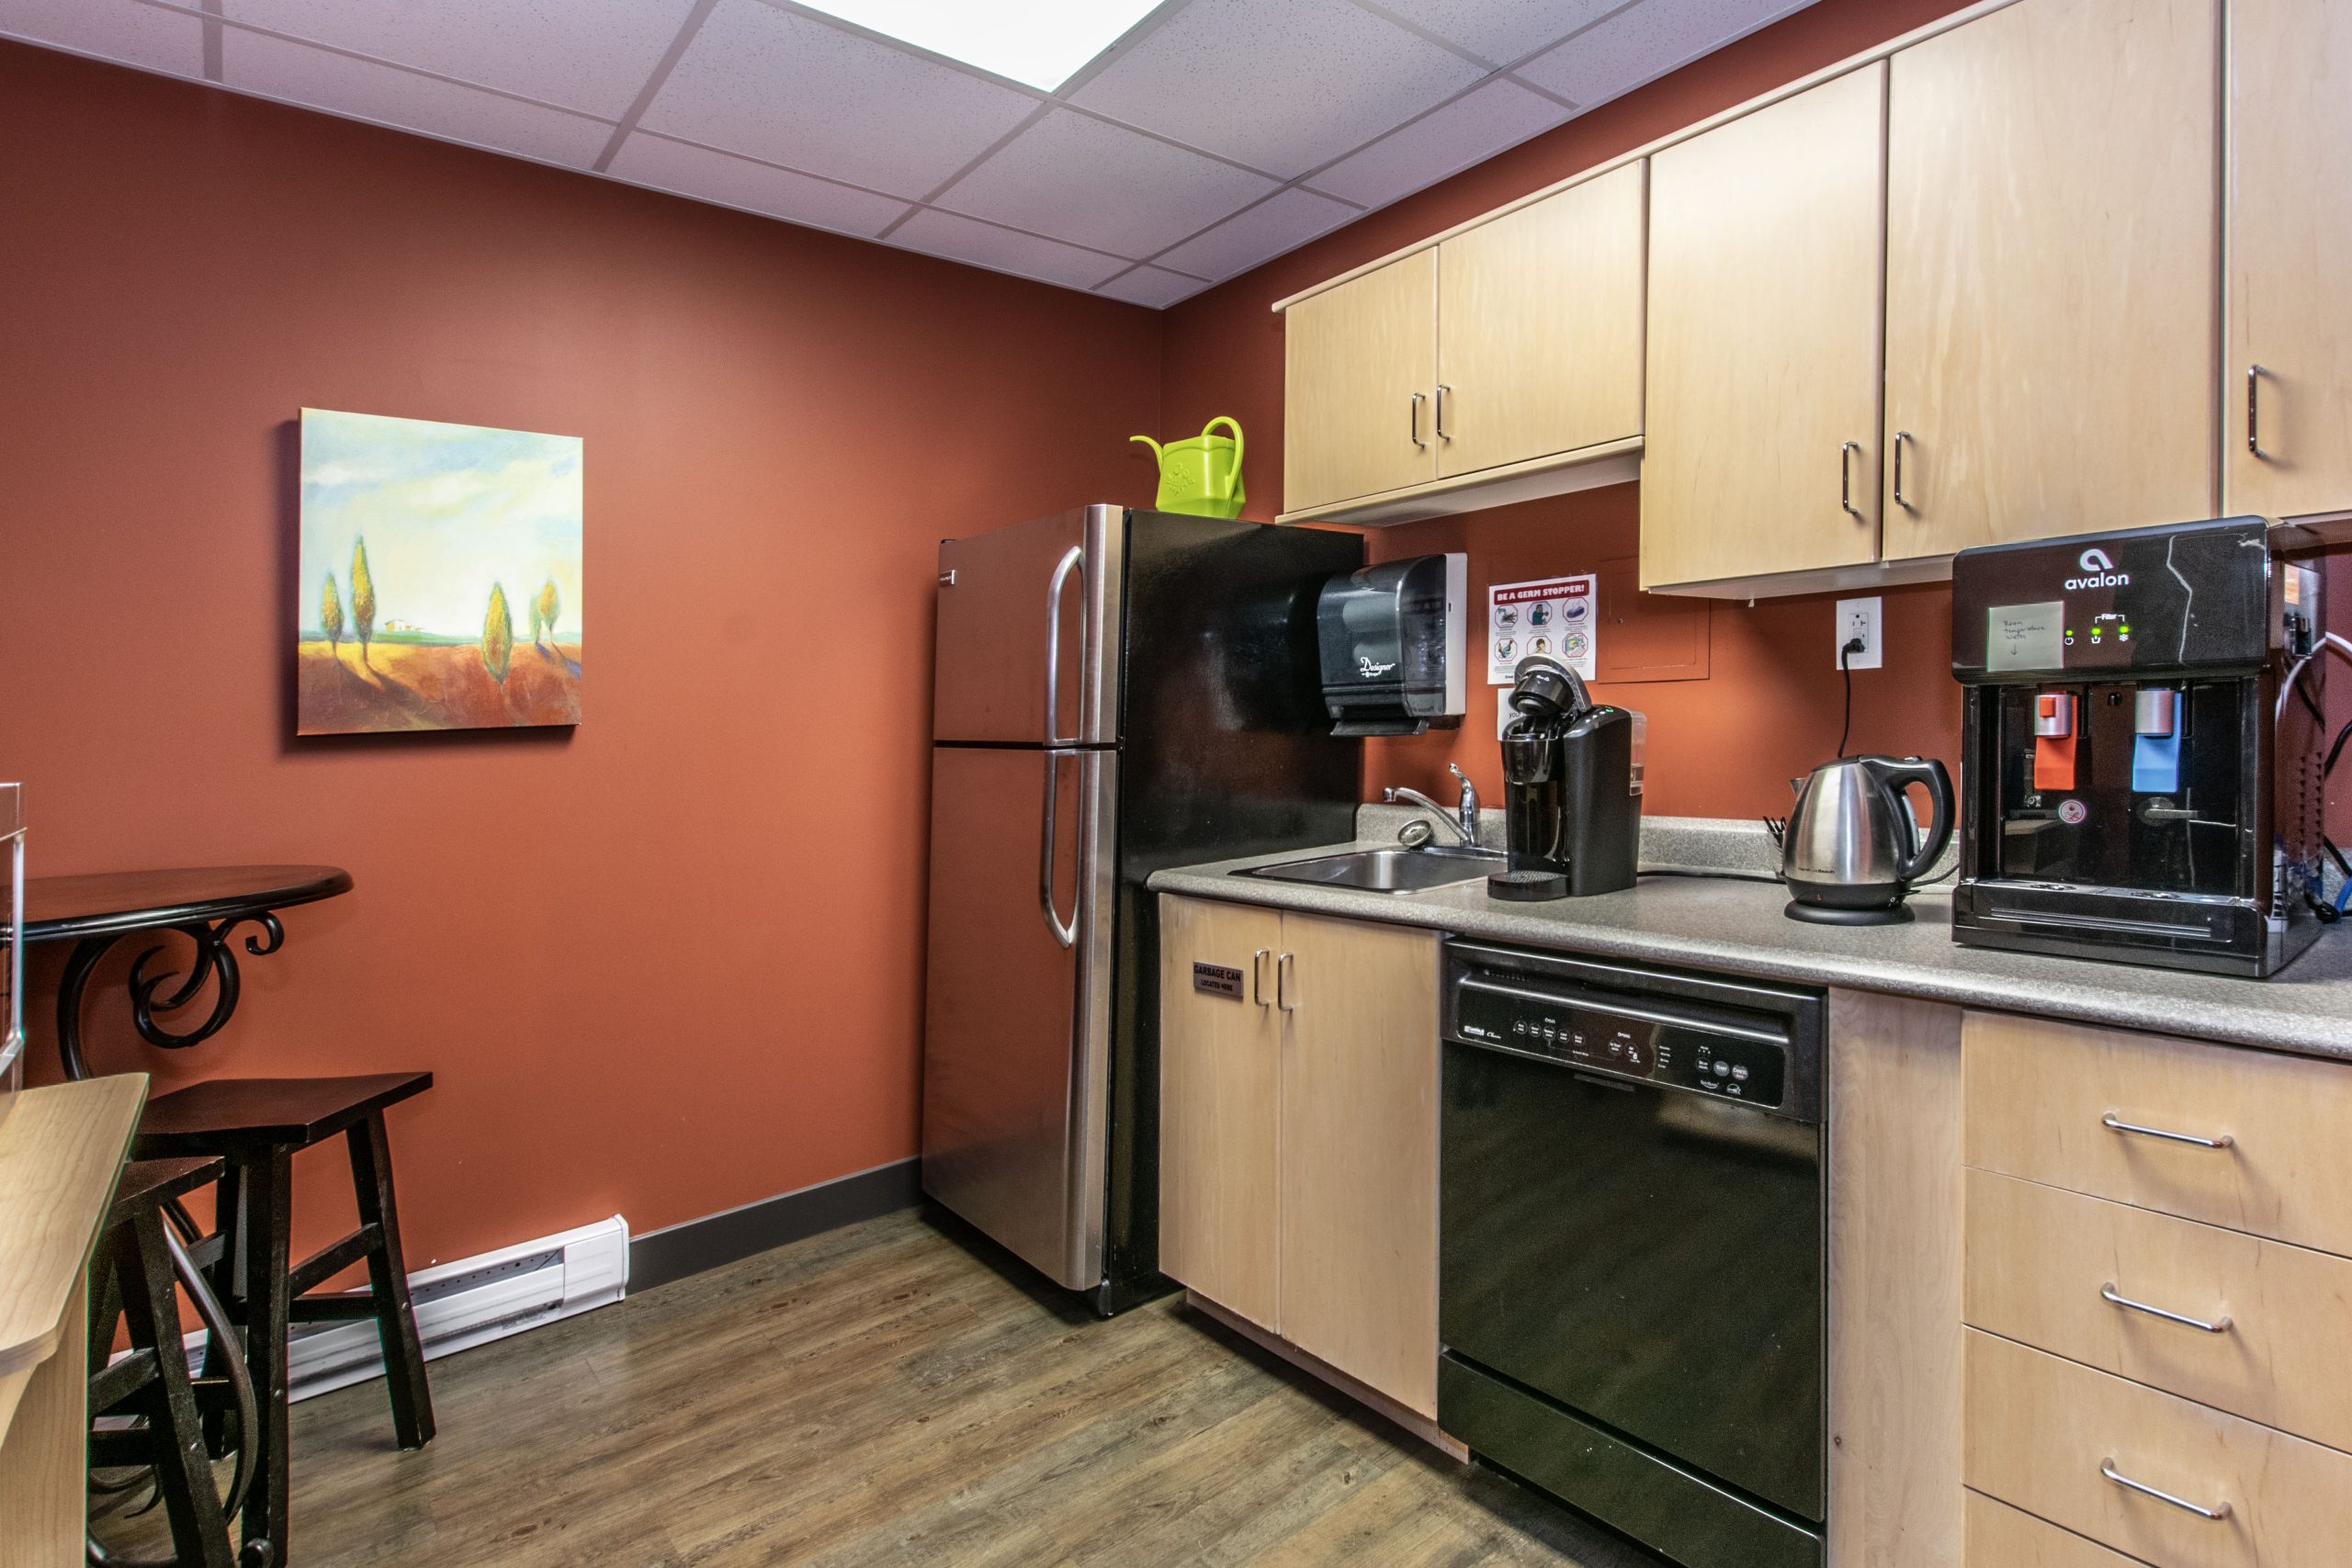 510 Topsail Road Officespace With Fully Stocked Kitchen Area